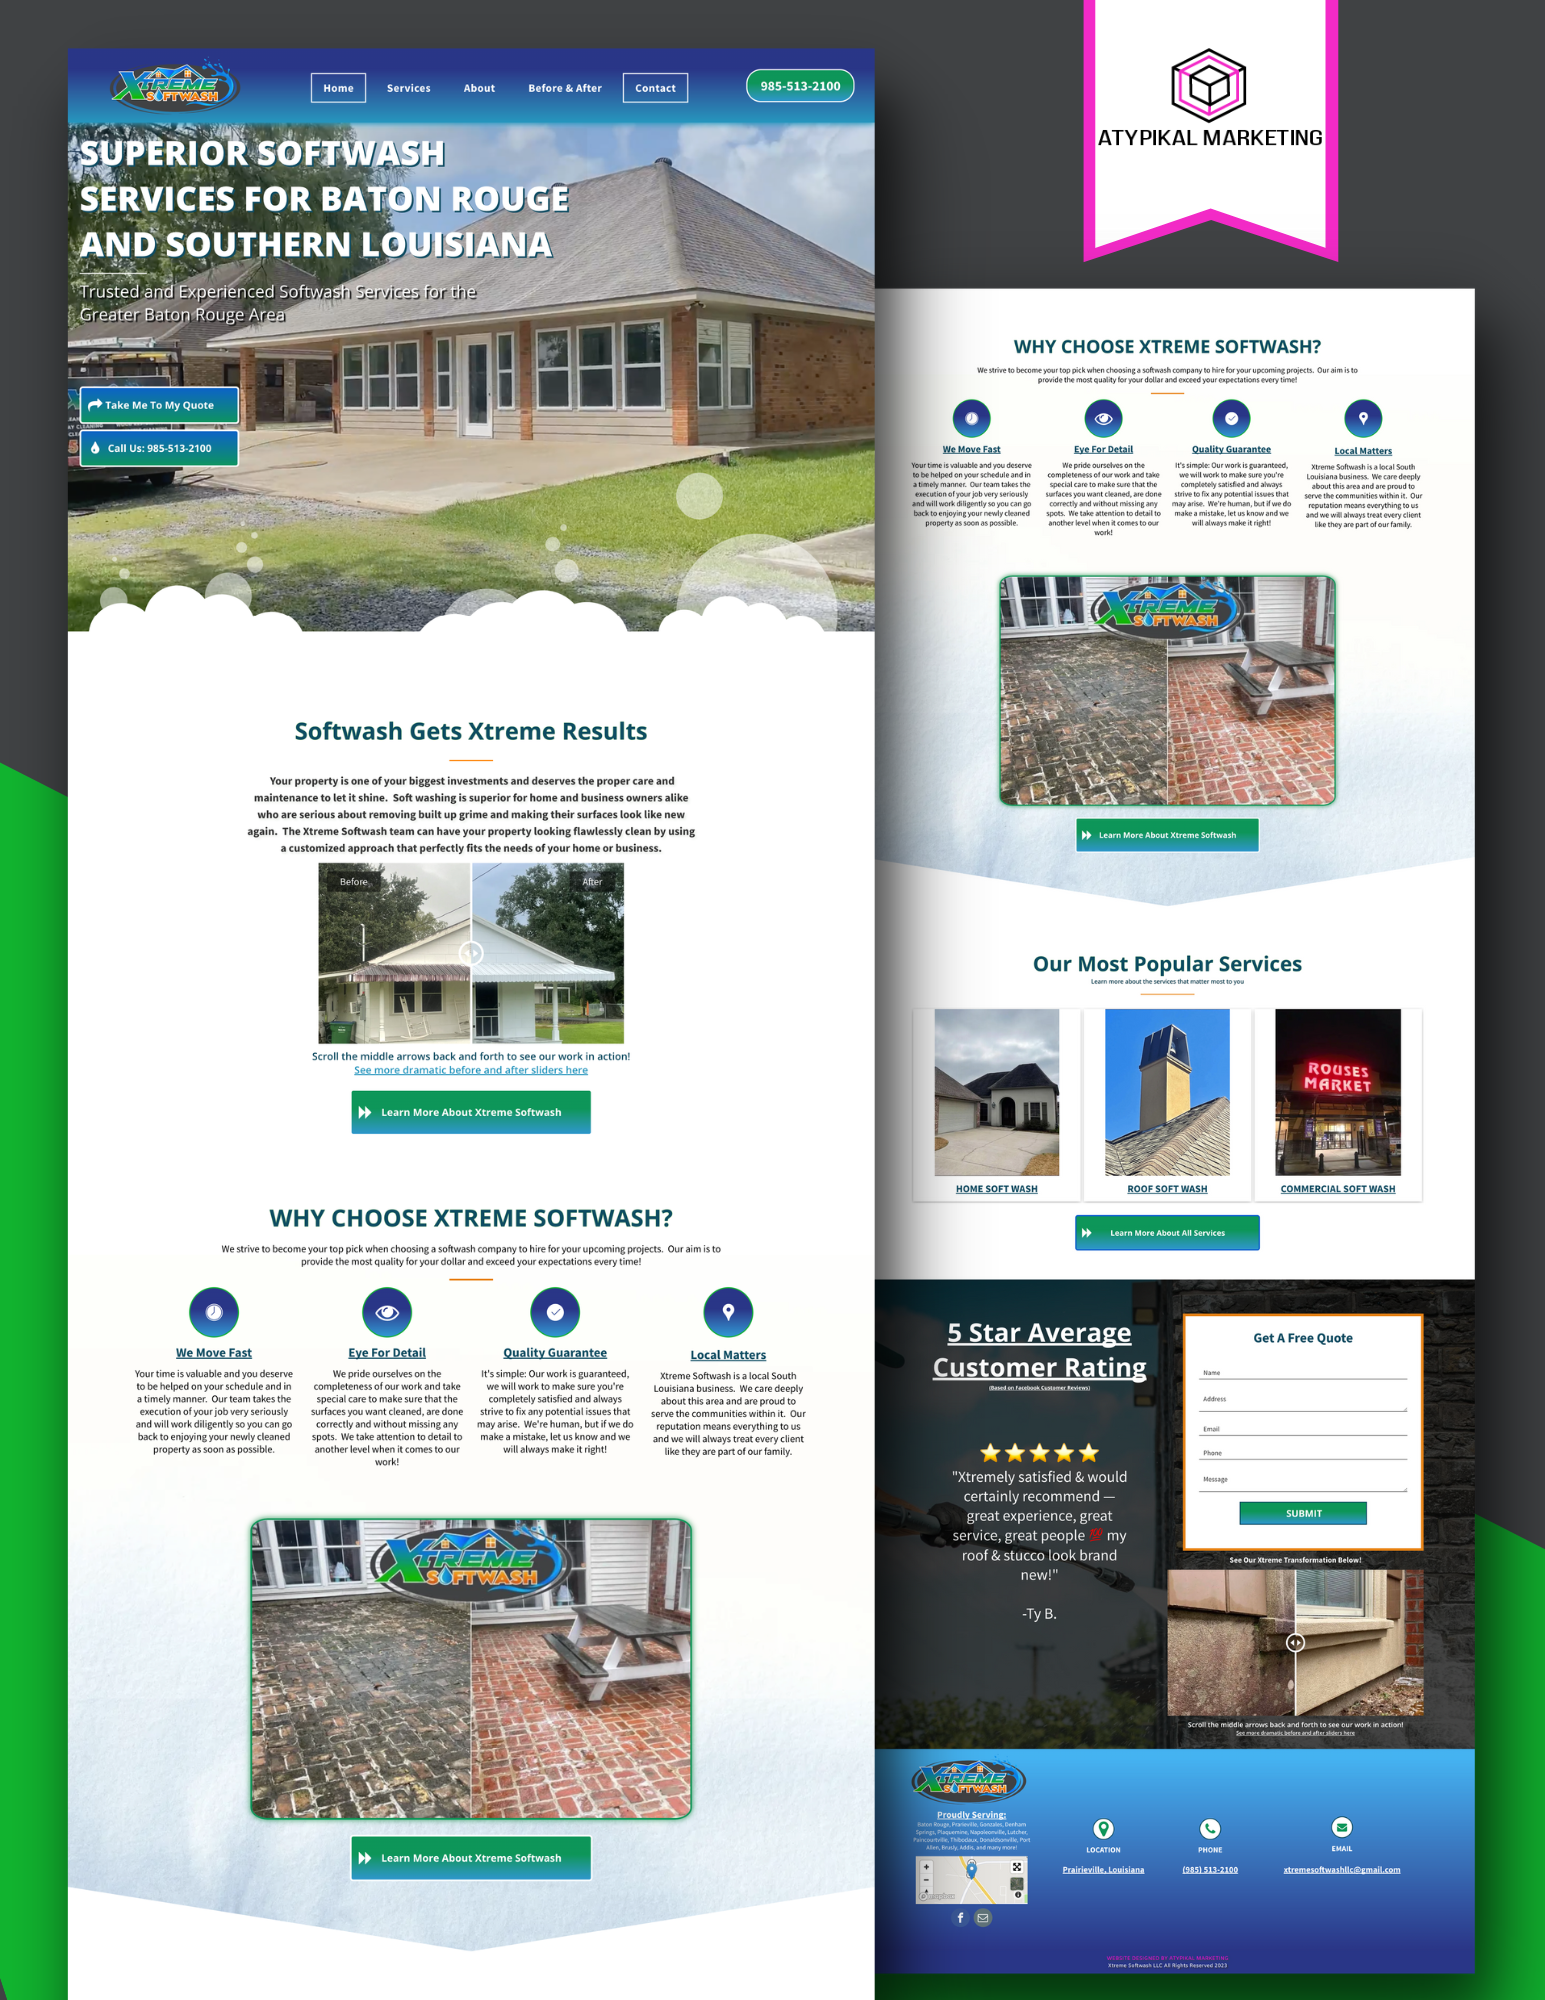 A screenshot of a website showing a house and a brick patio.